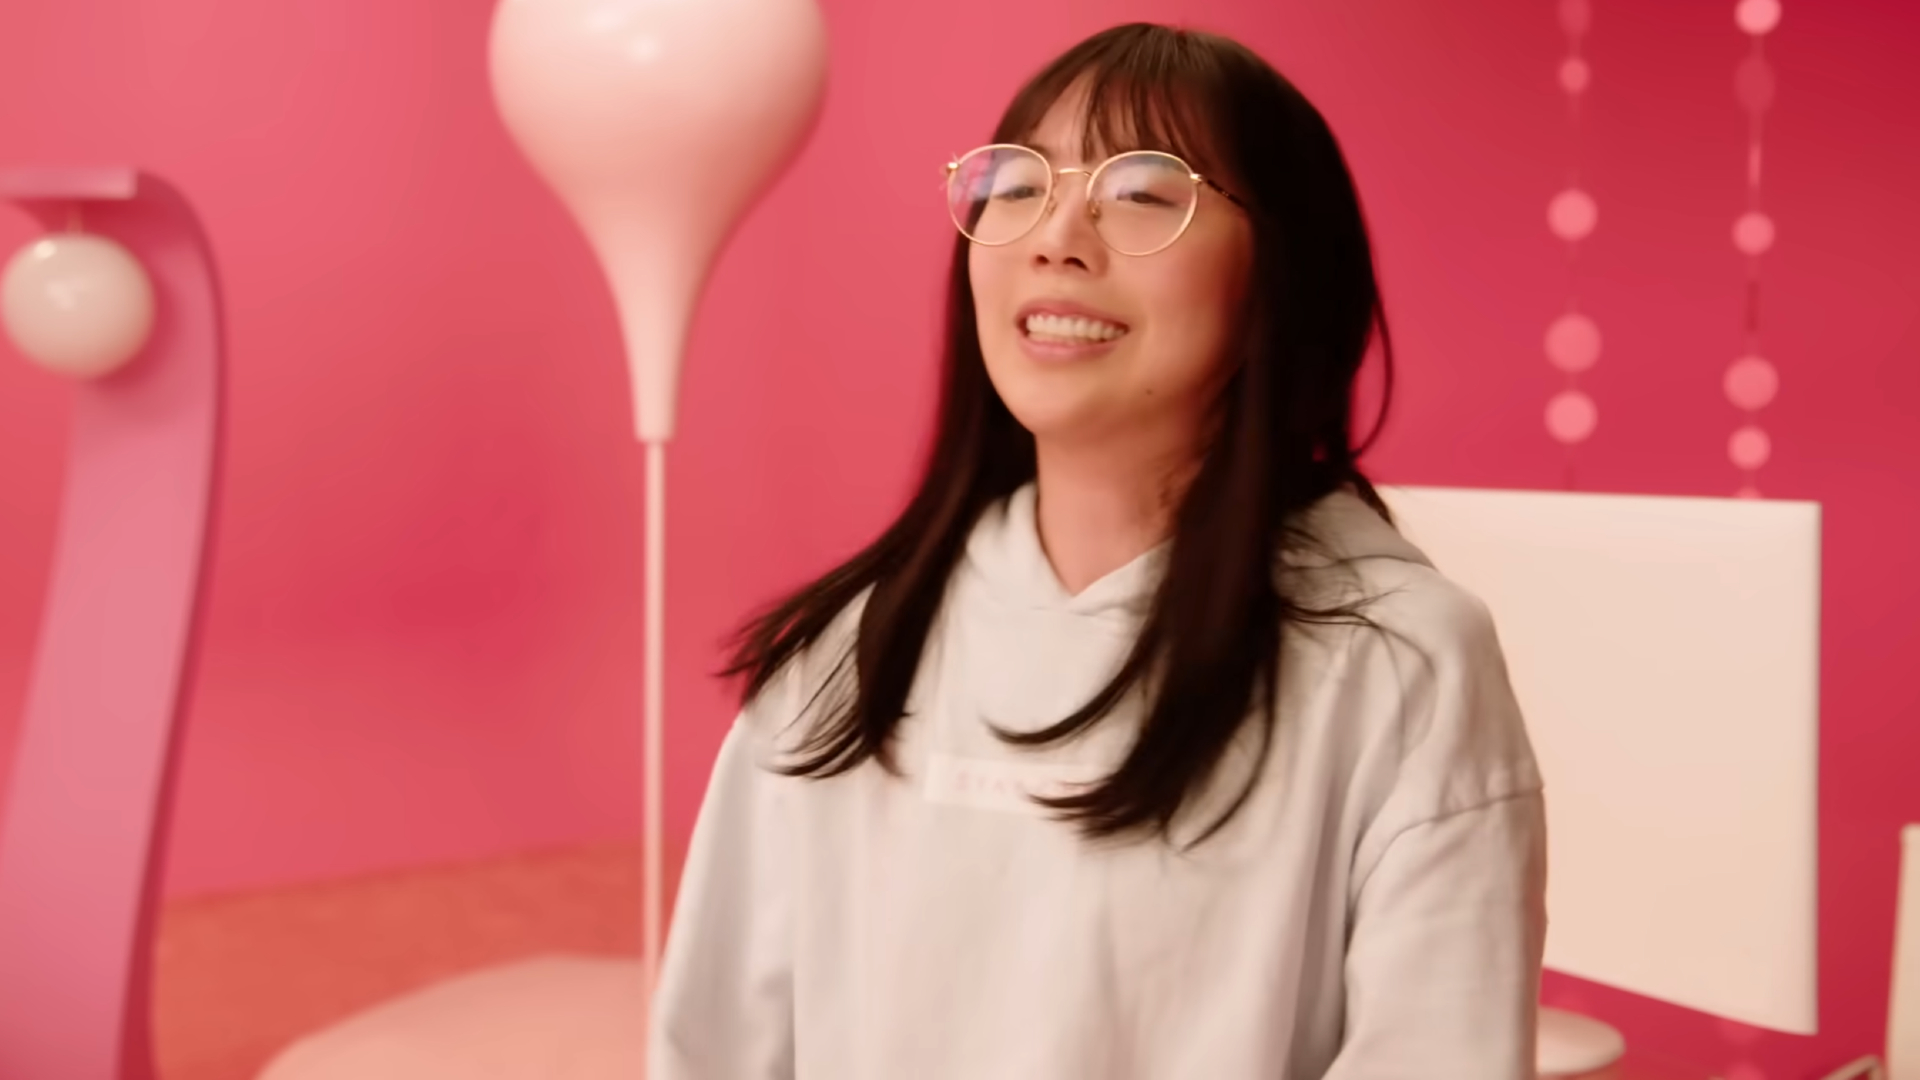 LilyPichu in her pink room 